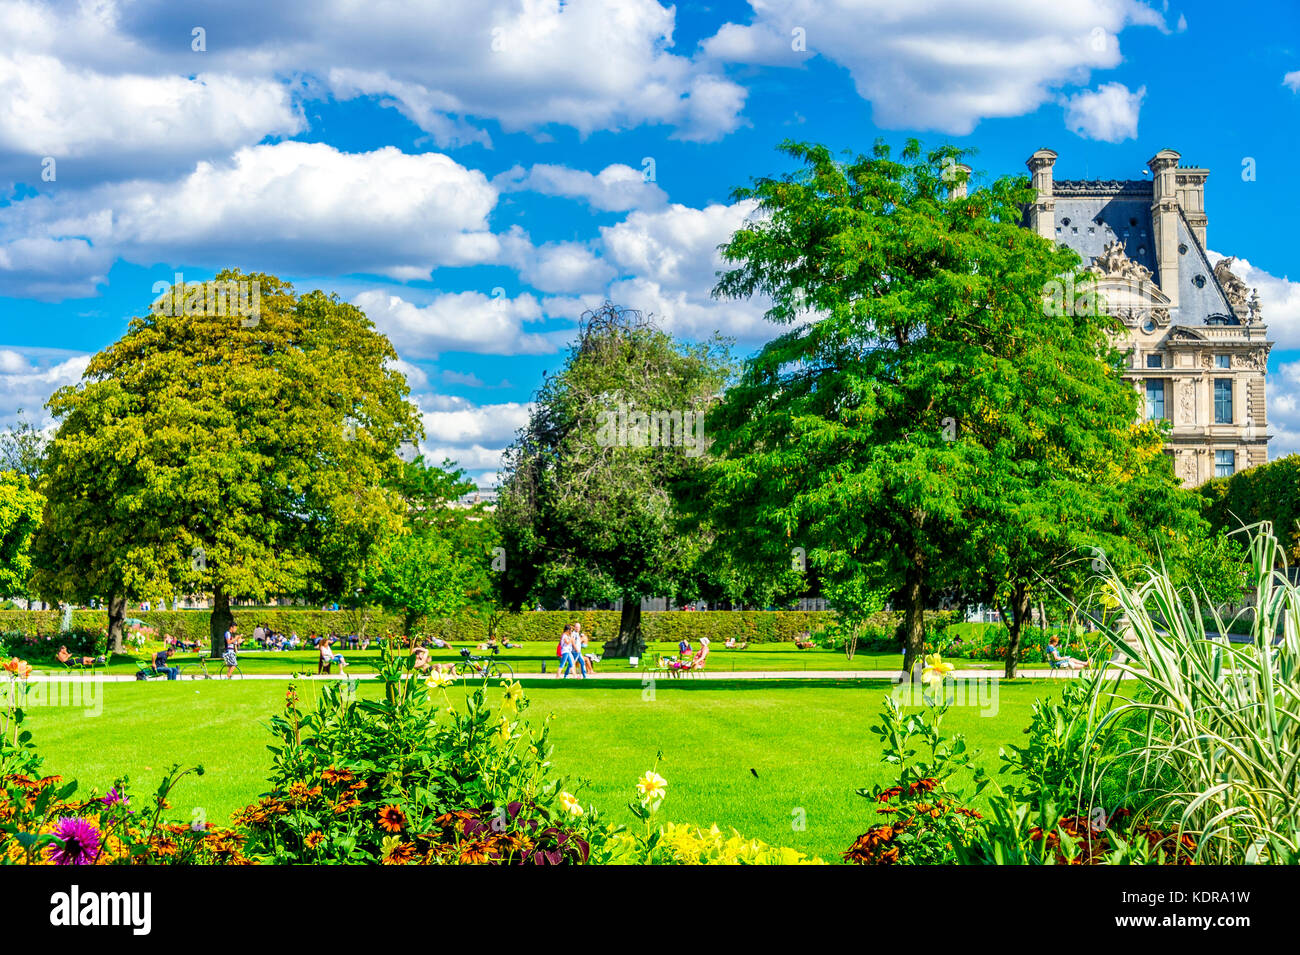 The Jardin des Tuileries (Tuileries Garden), and the beautiful architecture of the Louvre is on display in the background. Paris, France Stock Photo